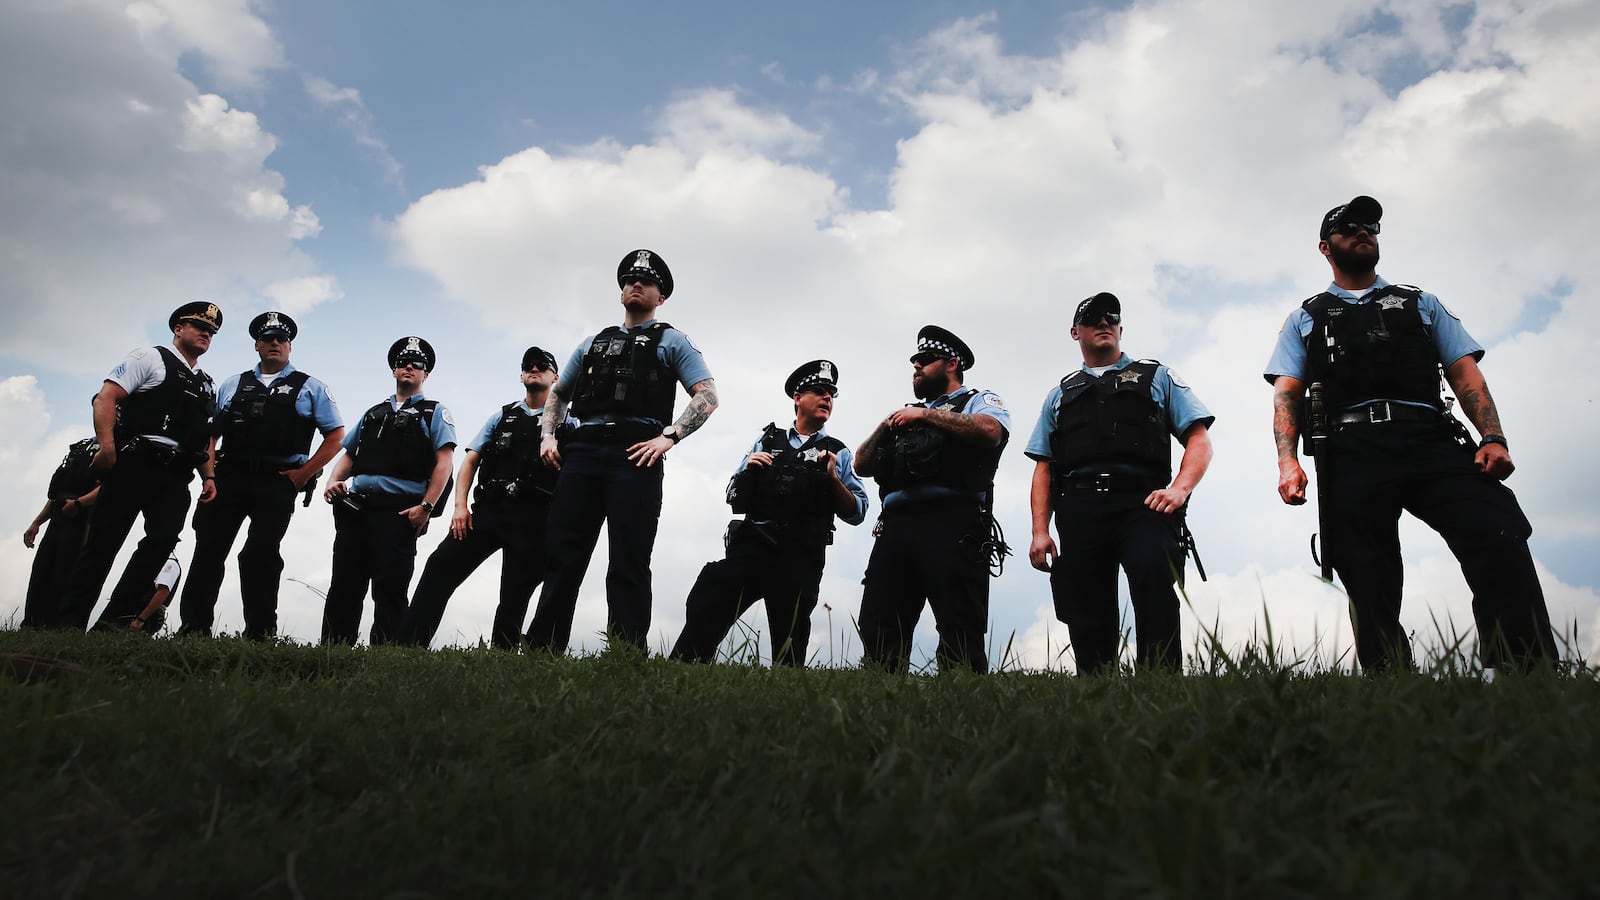 Police officers stand alongside Lake Shore Drive in August as protesters decry violence and lack of investment in African-American neighborhoods and schools